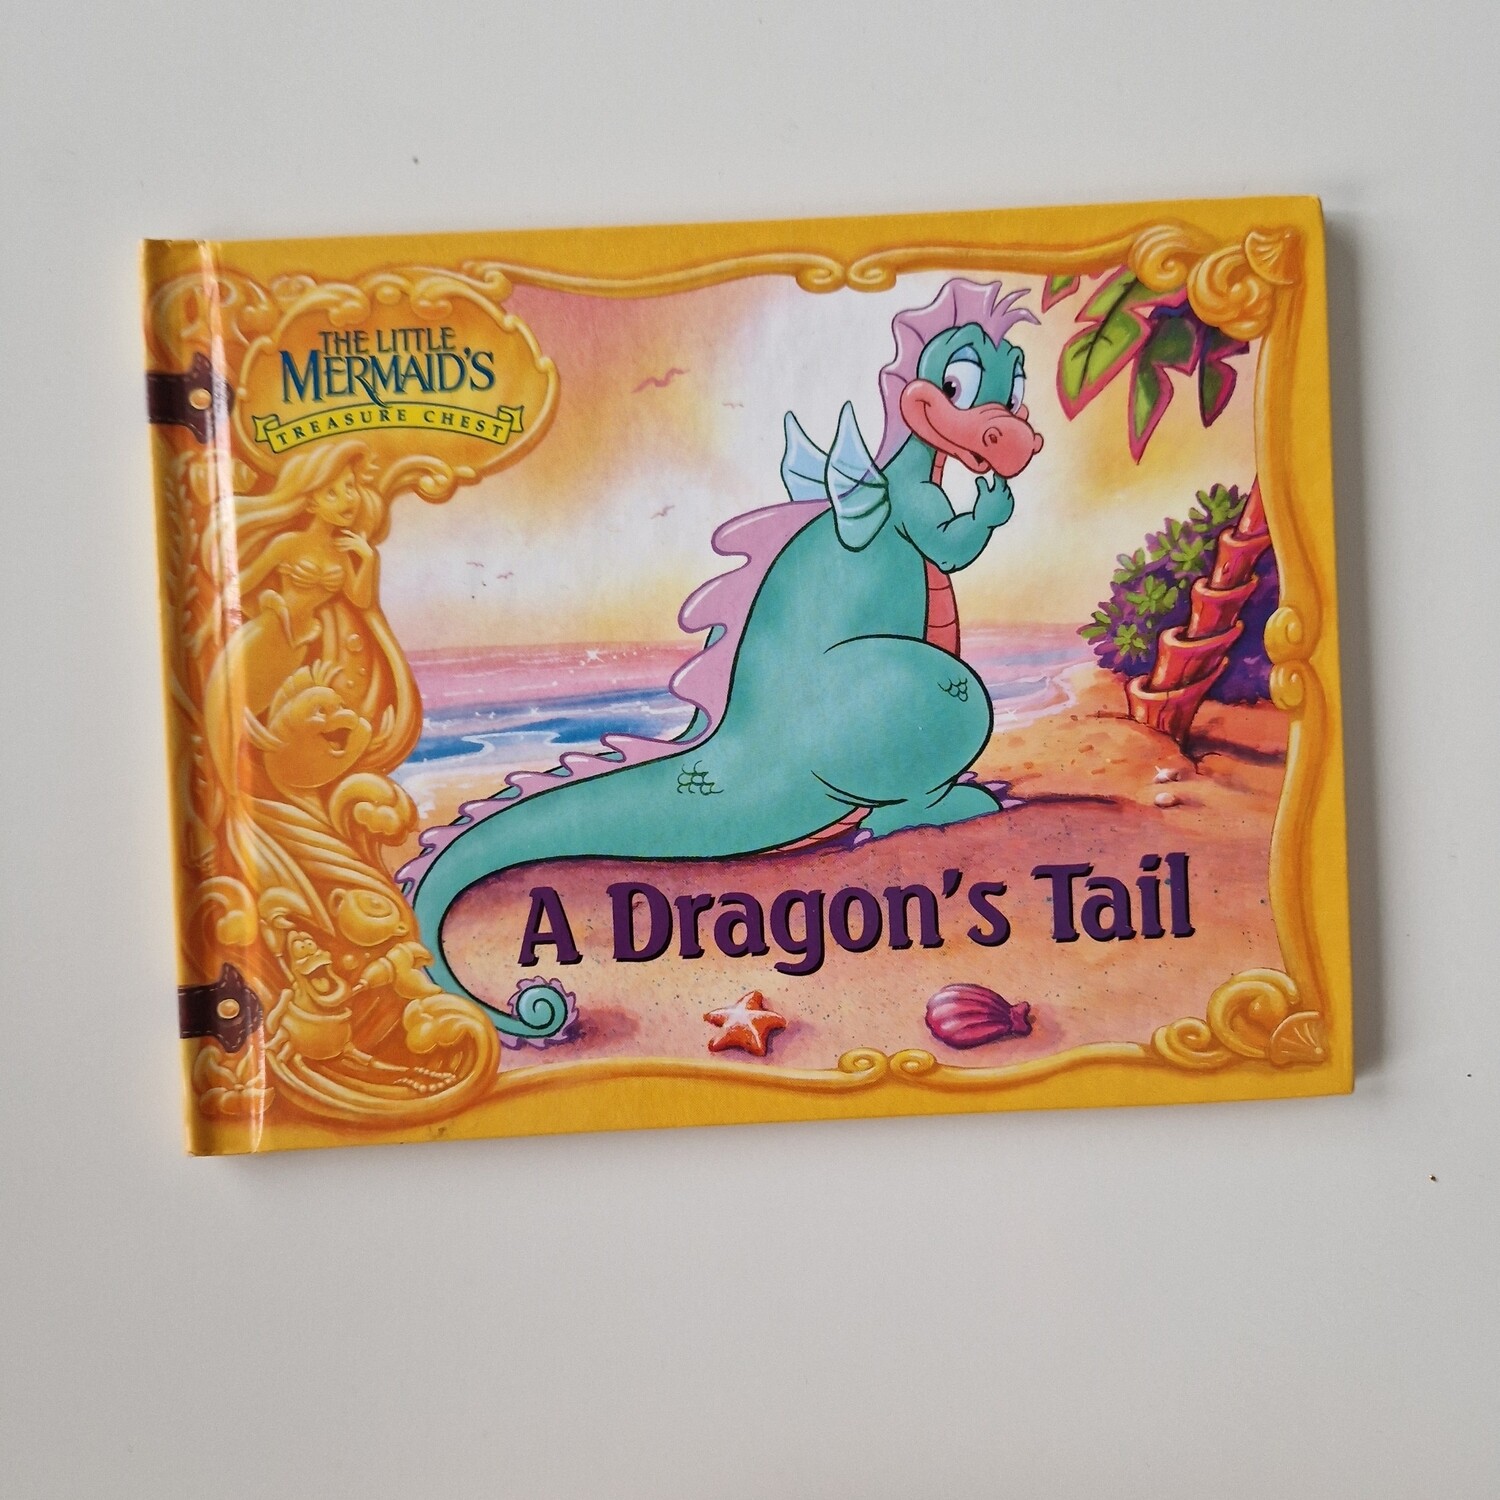 The Little Mermaid - A Dragon's Tail, Scales